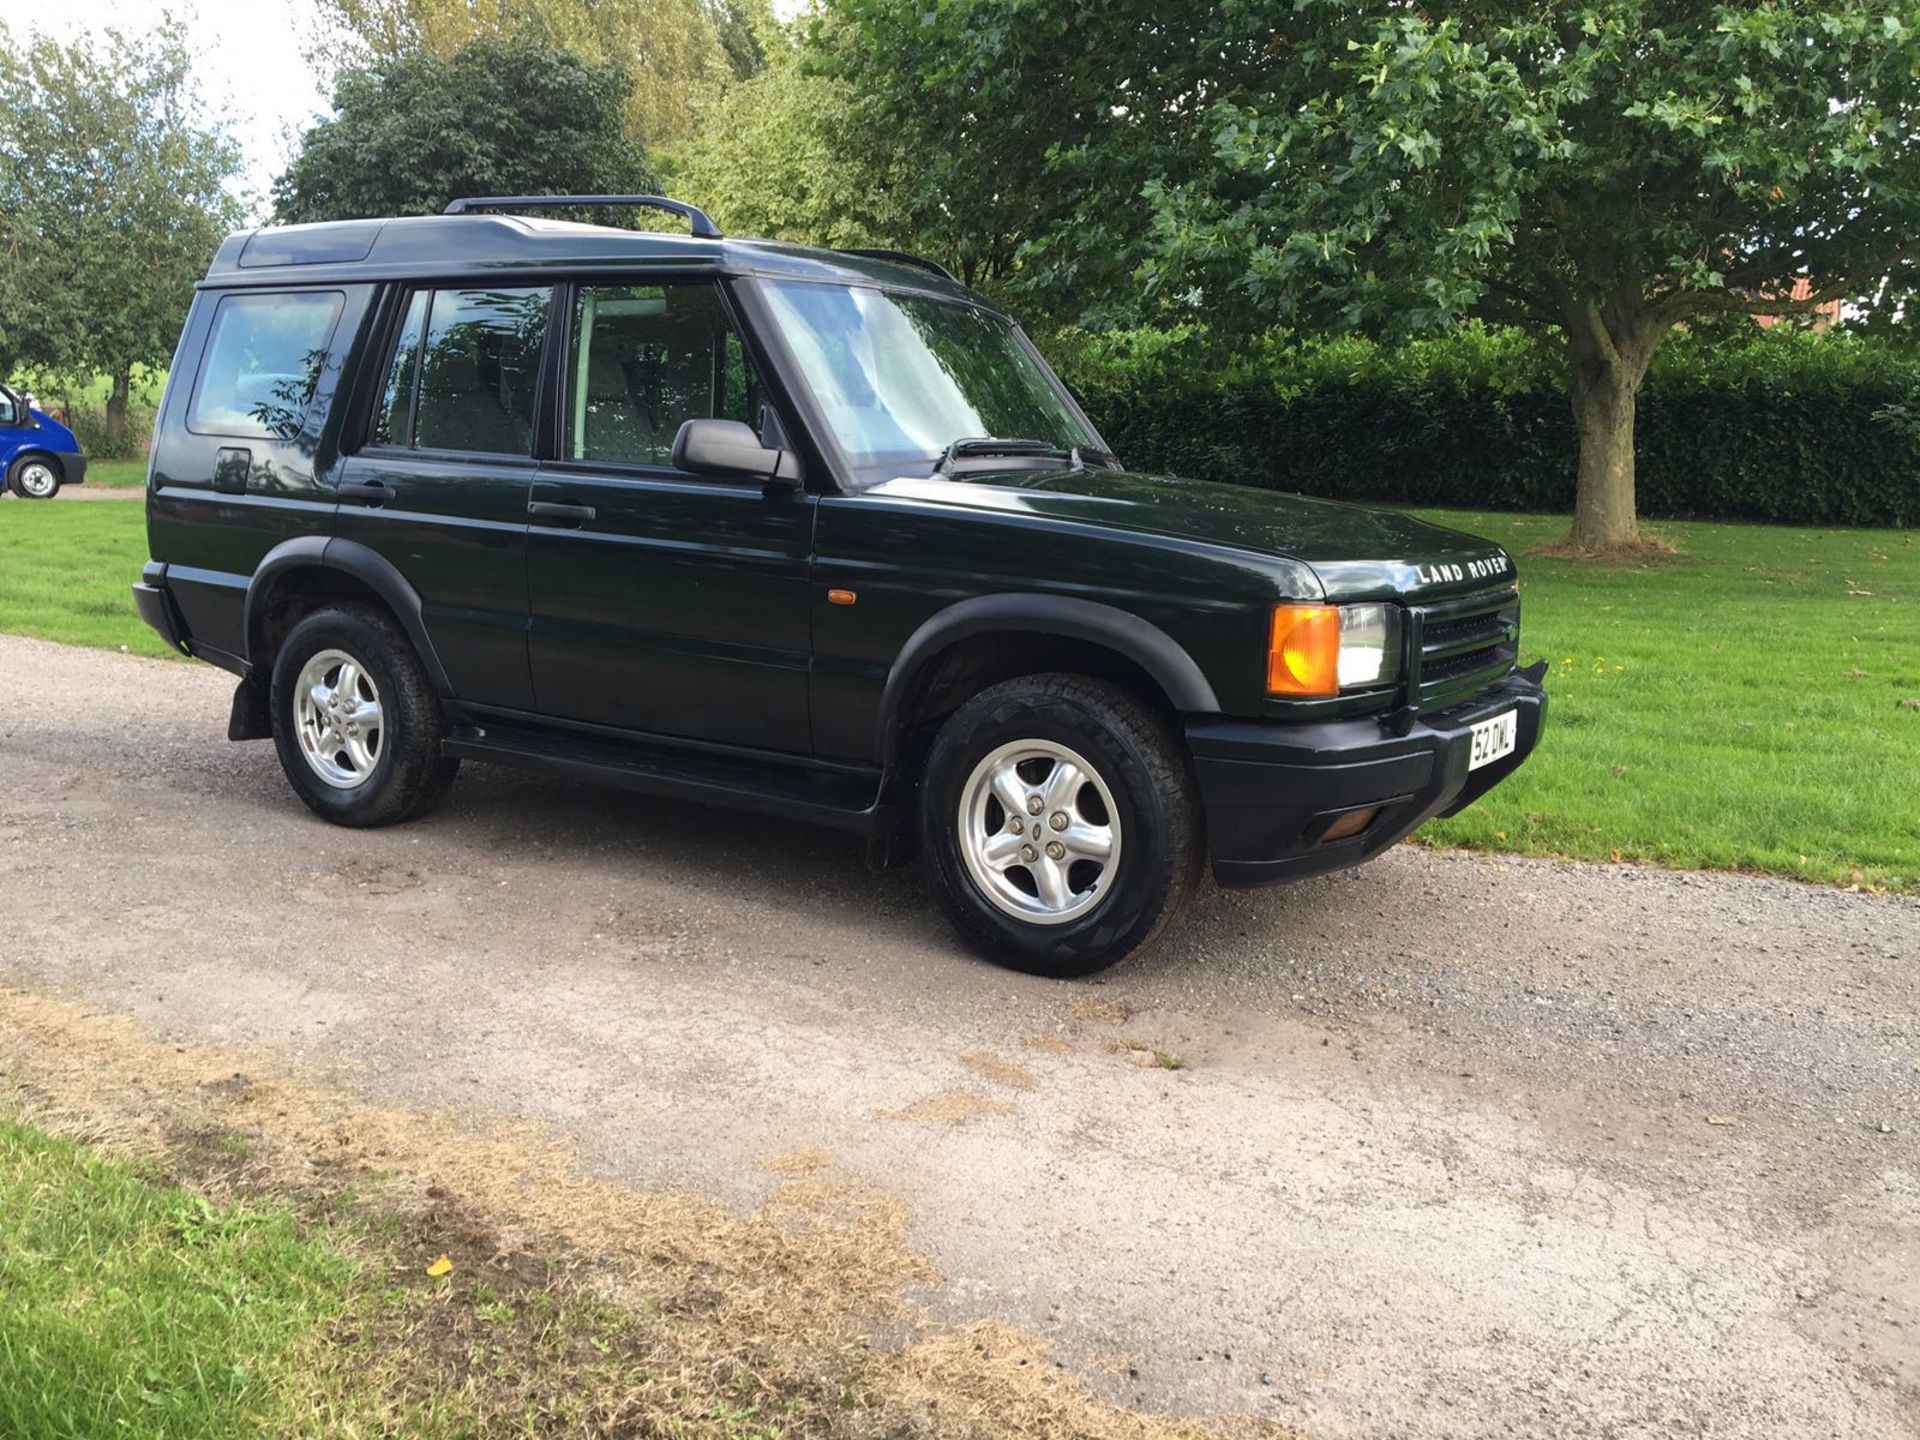 1999 REG LAND ROVER DISCOVERY GREEN, NEW ENGINE FITTED NOT LONG AGO AND COMES WITH NEW MOT *NO VAT*